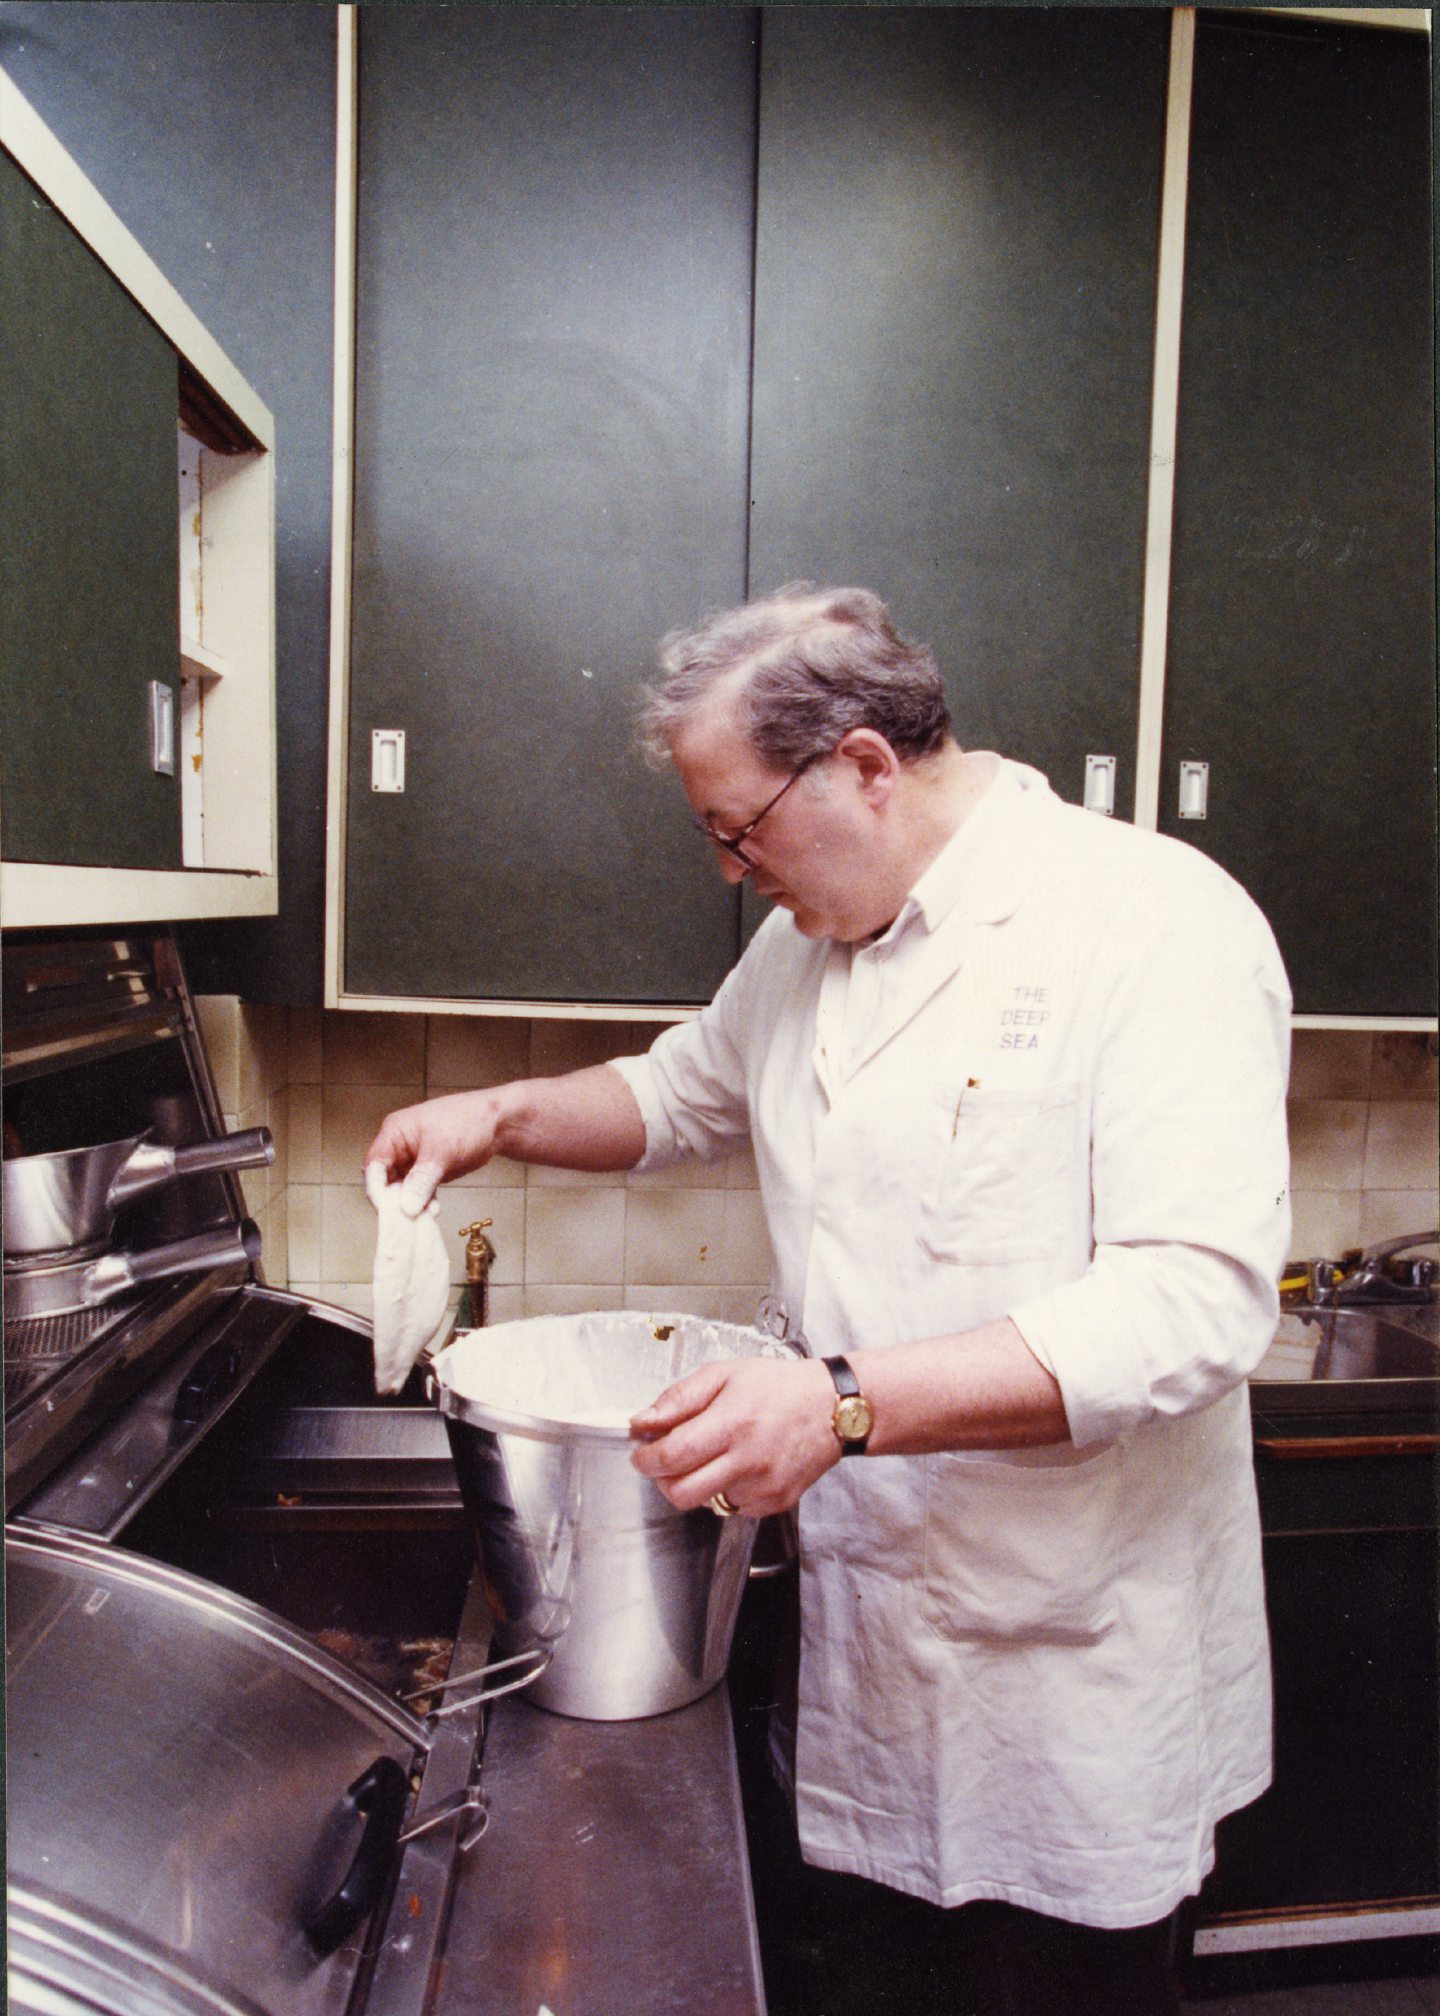 Raymond Sterpaio cooking fish in 1991. Image: DC Thomson.